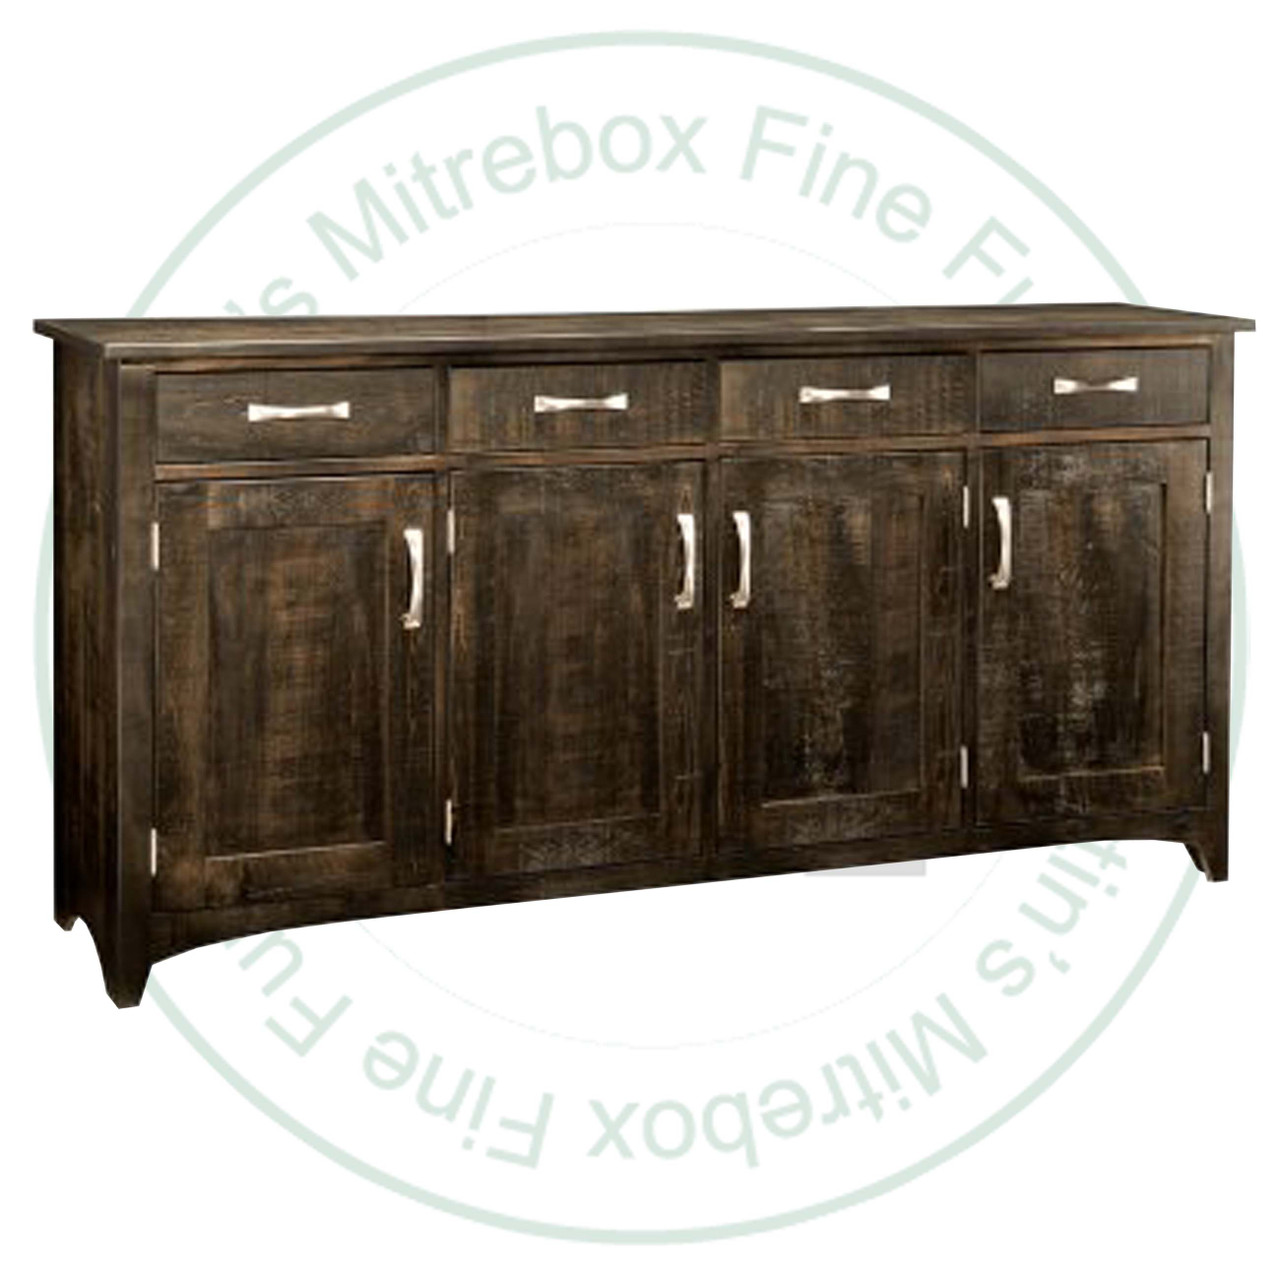 Wormy Maple Bancroft Sideboard 19''D x 77''W x 39.5''H With 3 Wood Doors And 4 Drawers